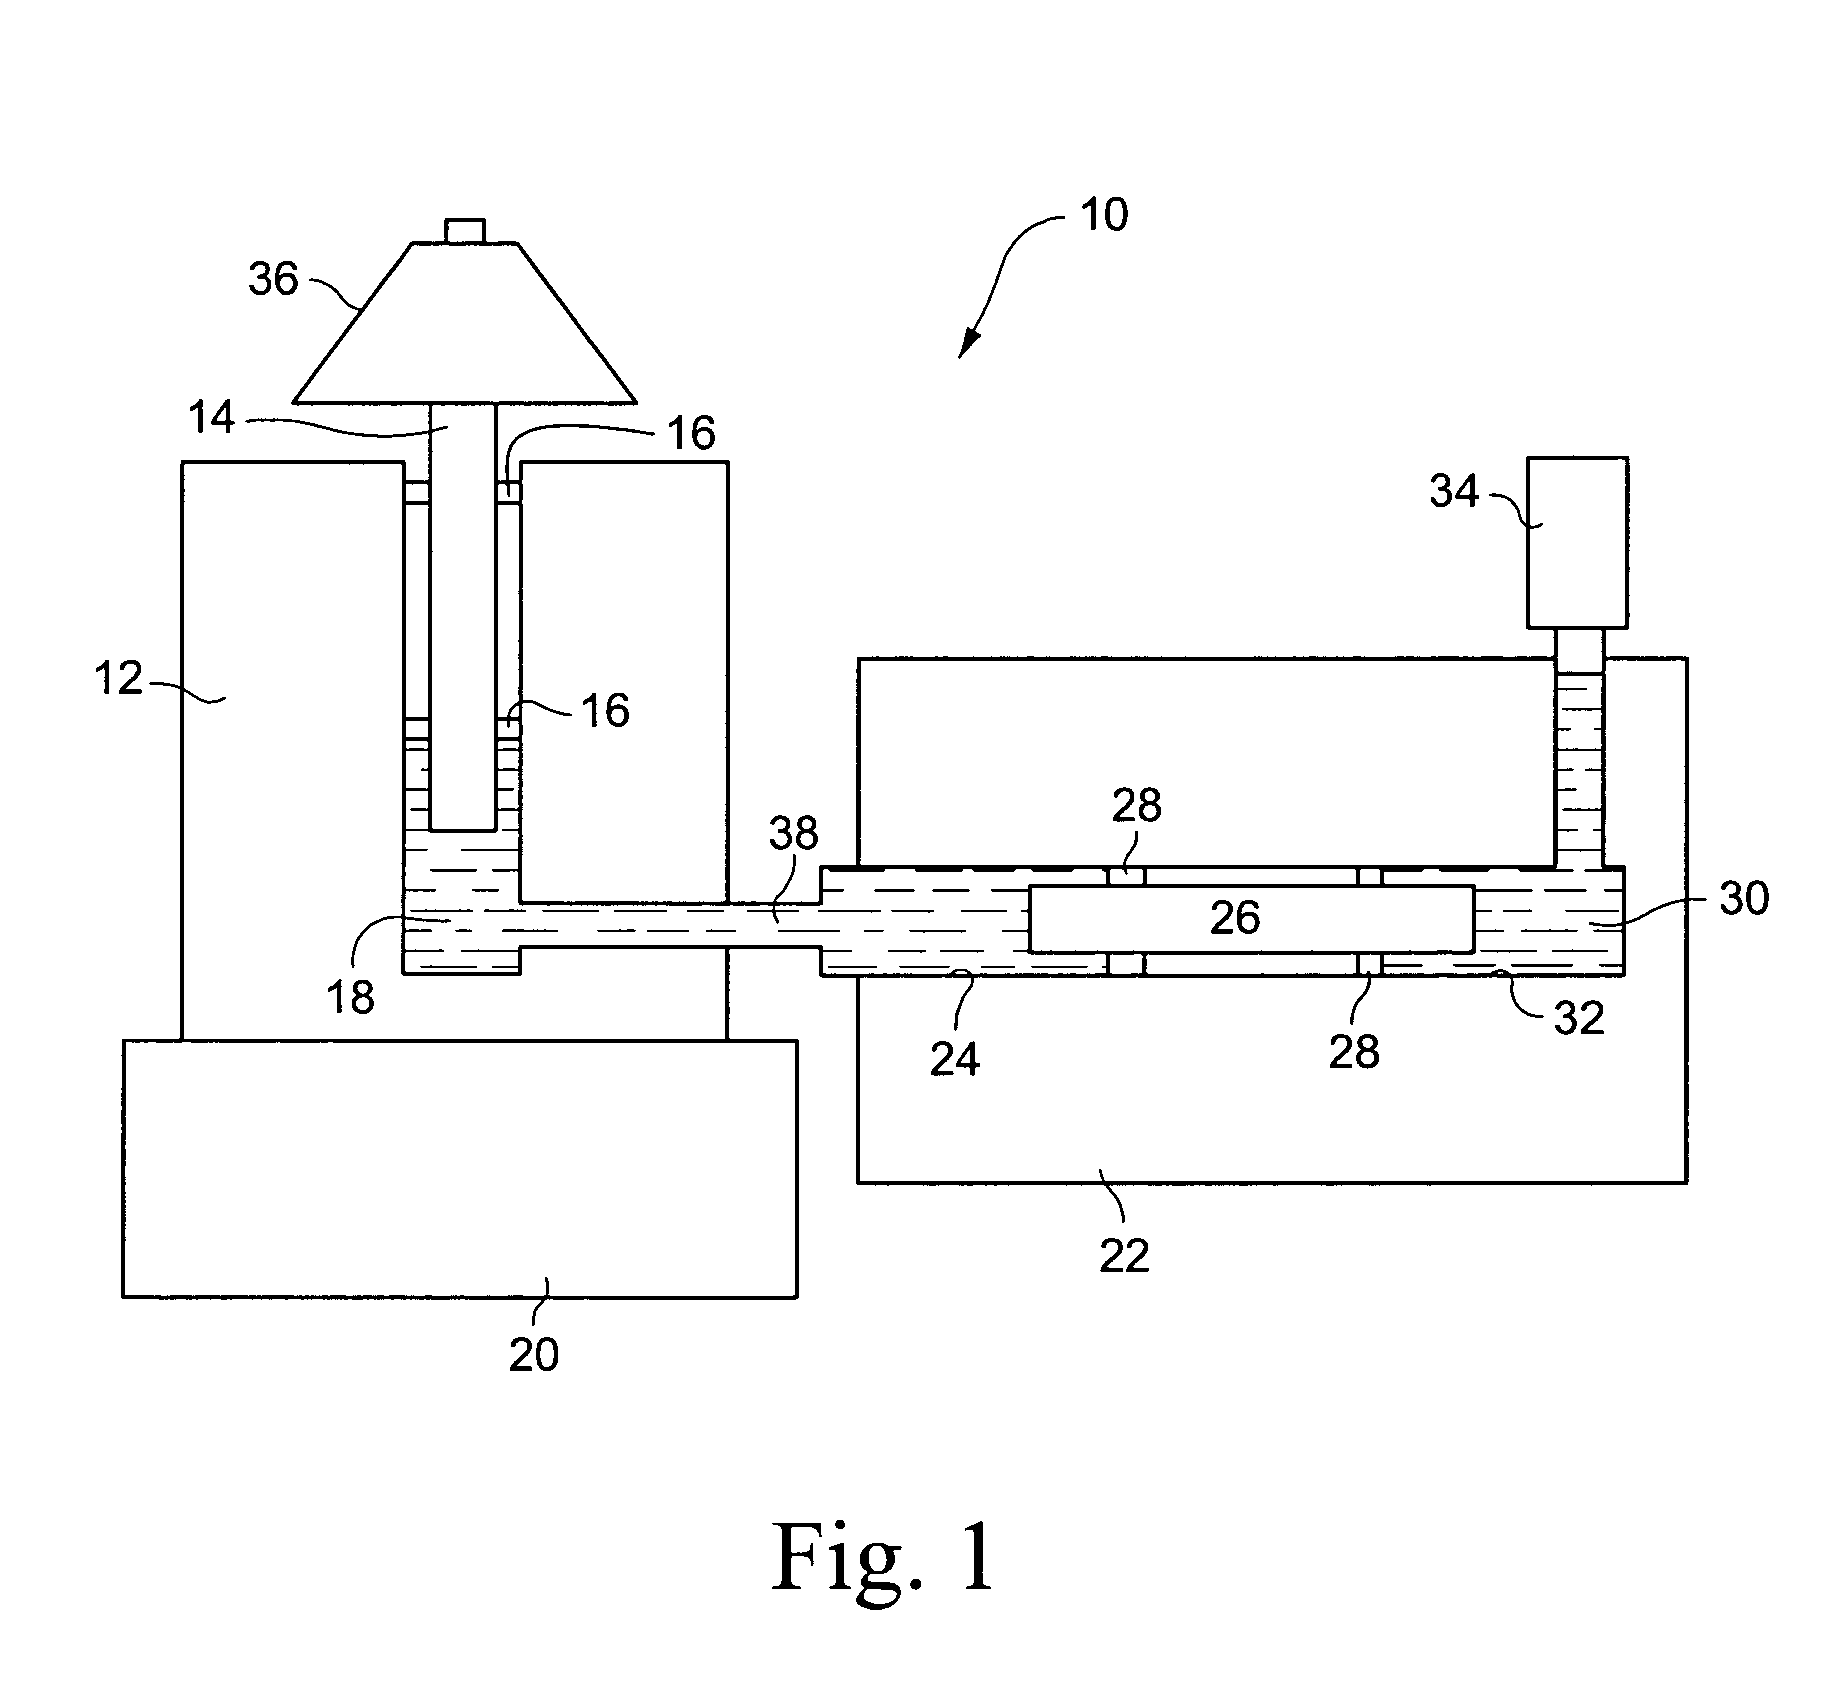 Apparatus and methods for dynamically pressure testing an article